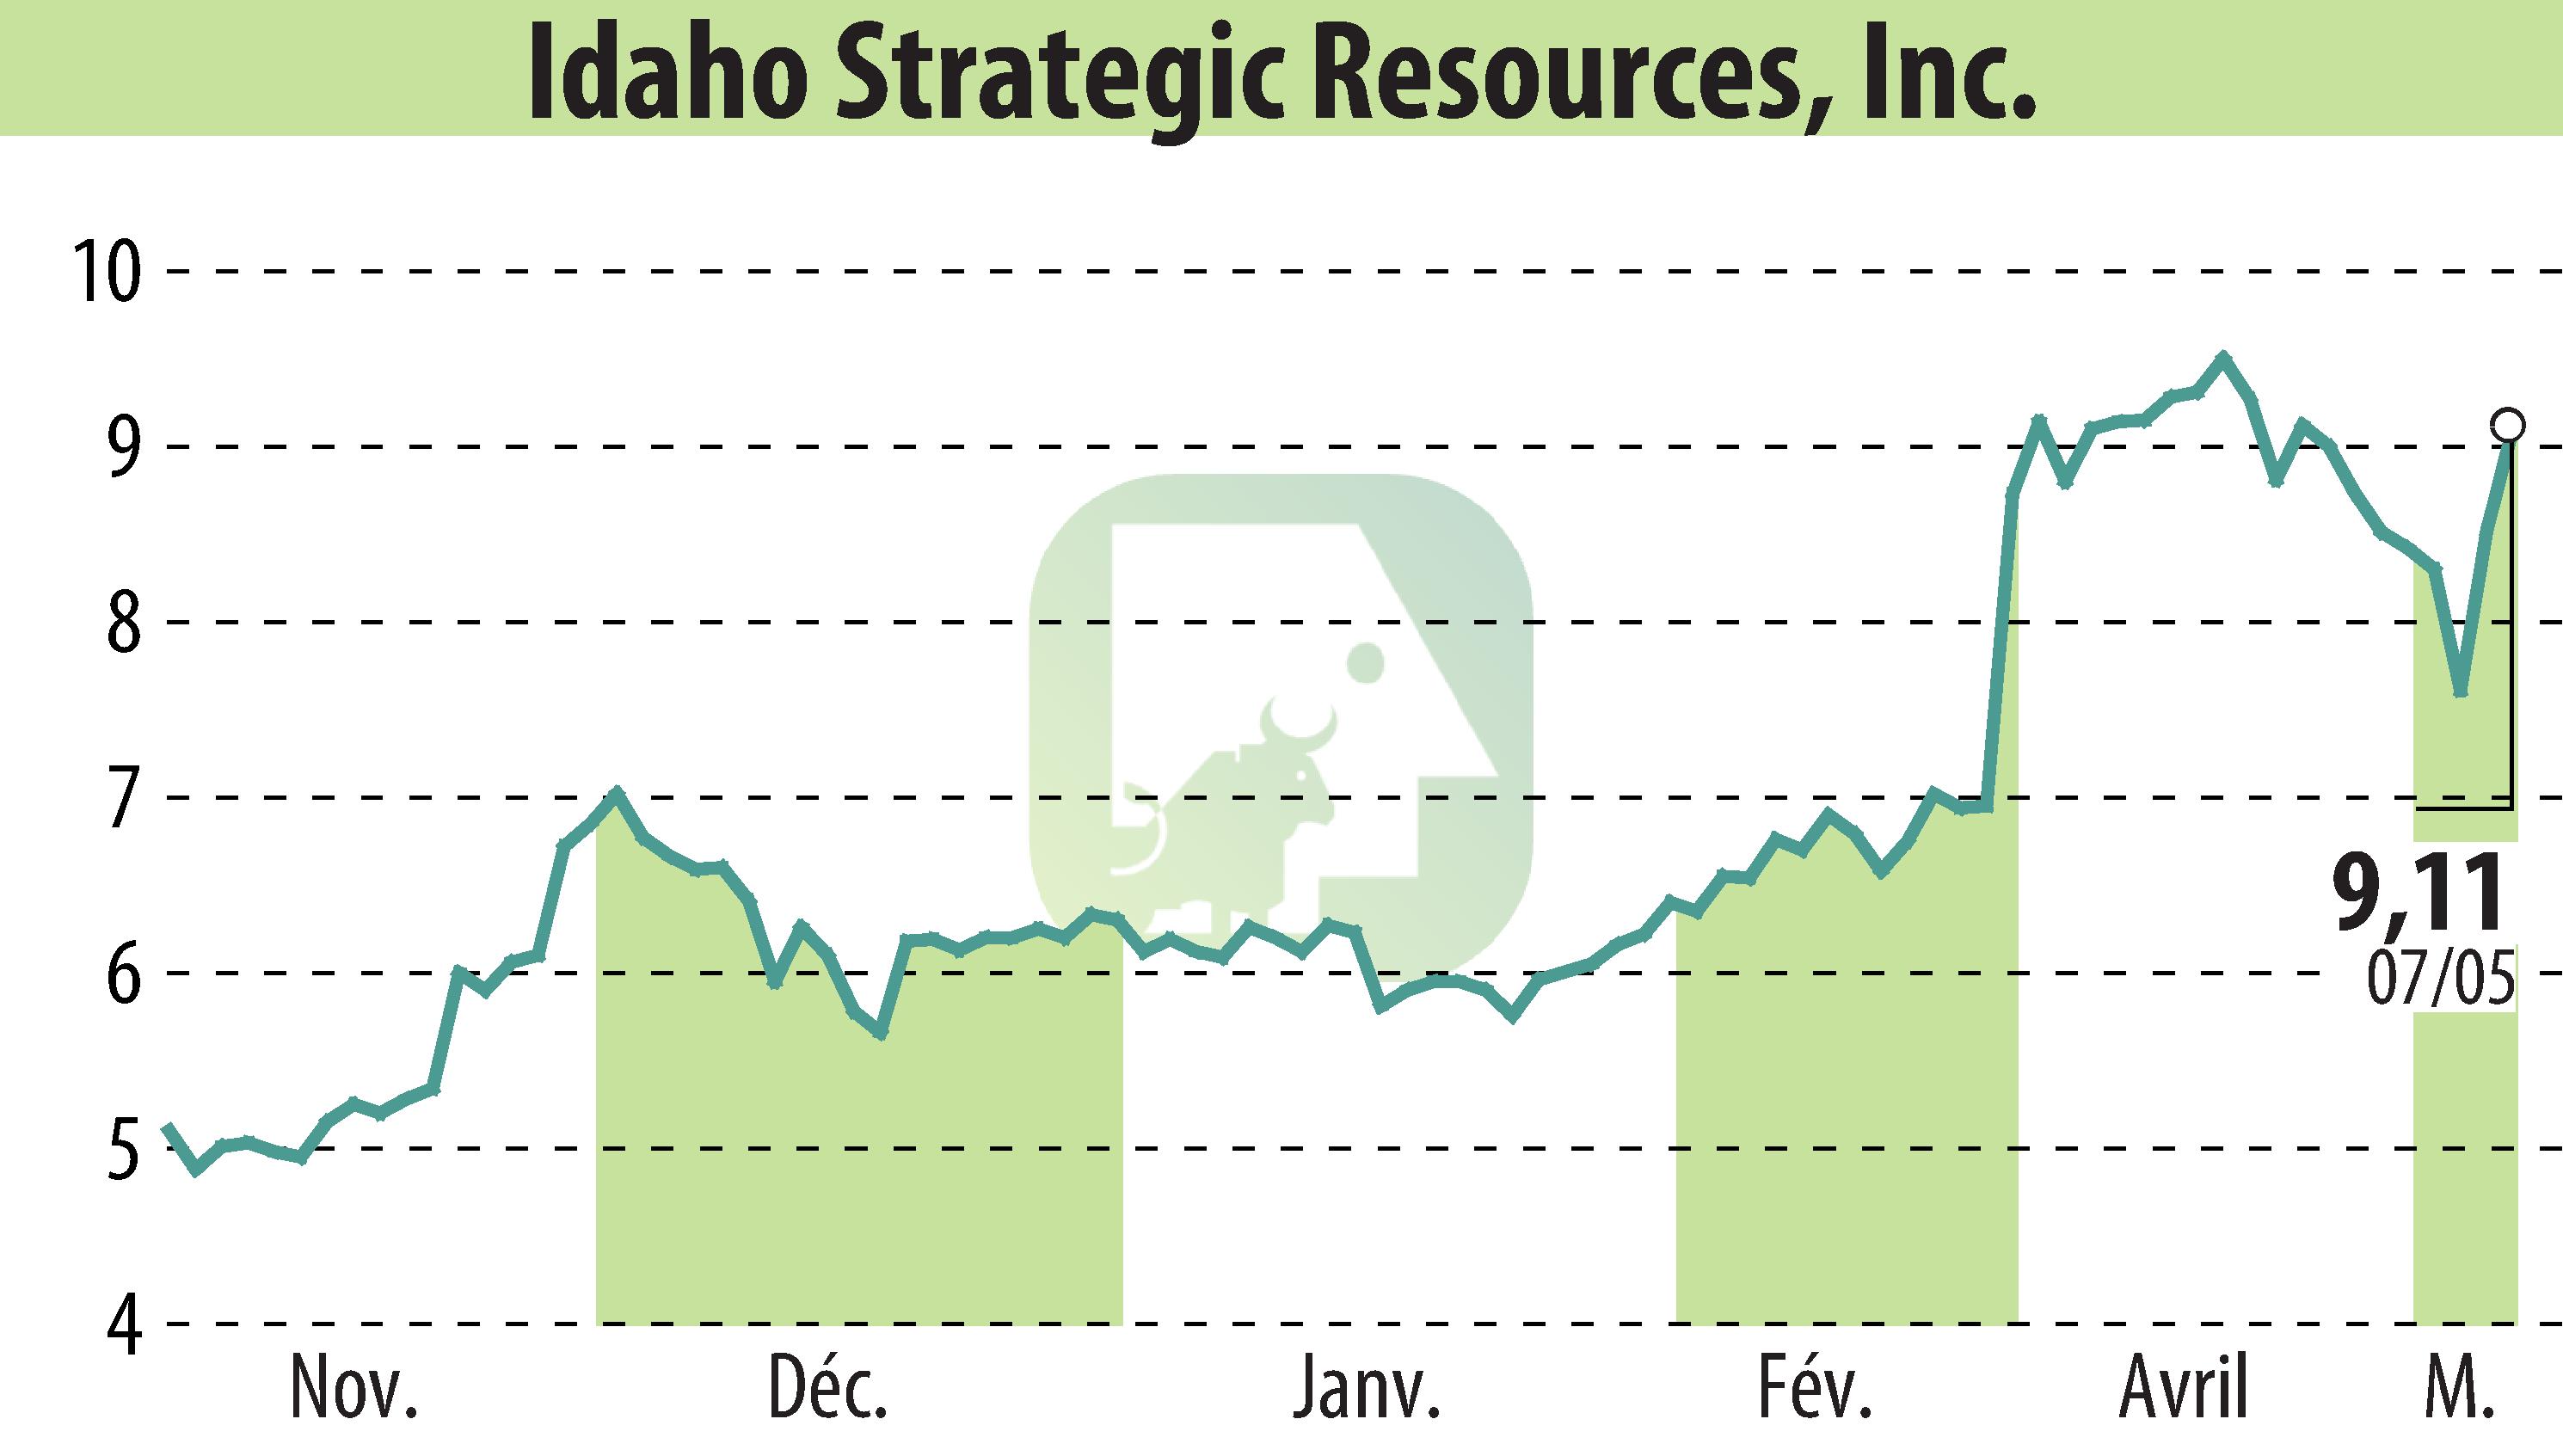 Stock price chart of Idaho Strategic Resources, Inc. (EBR:IDR) showing fluctuations.